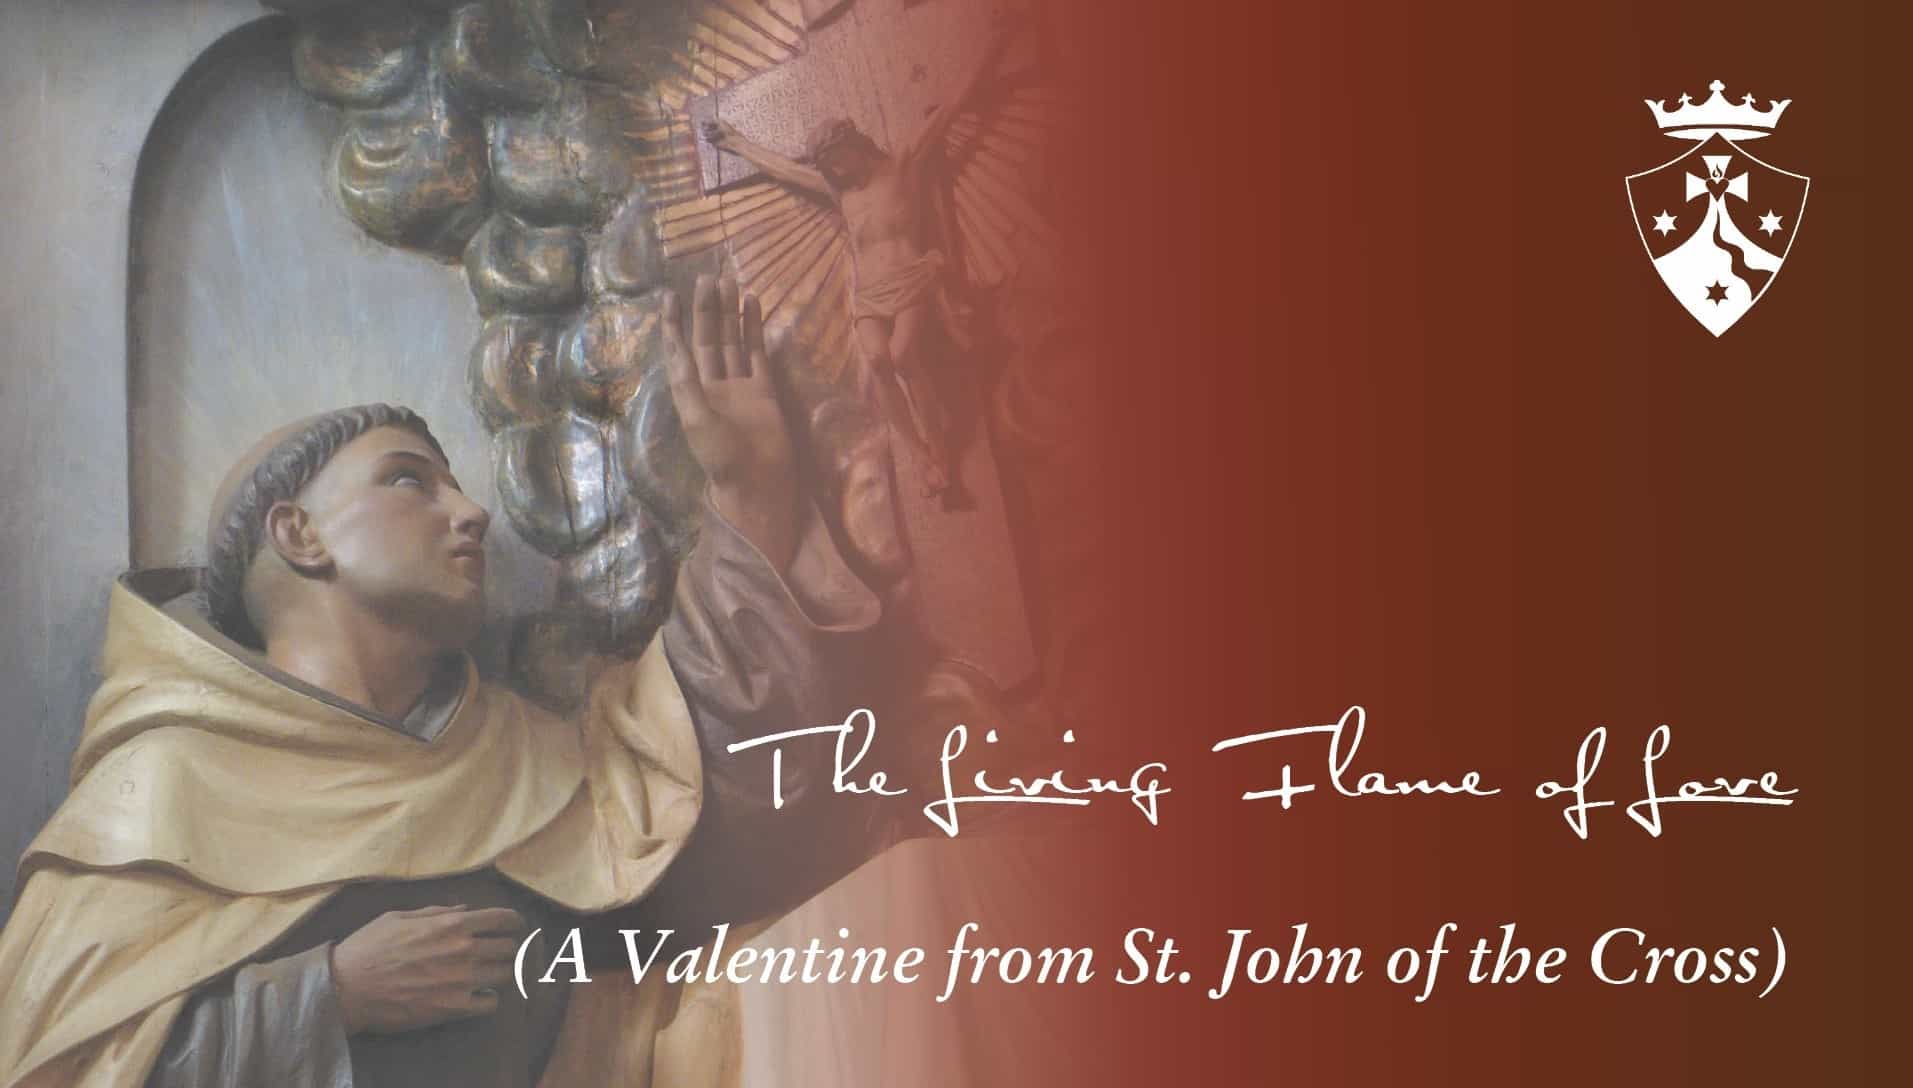 'The Living Flame of Love, A Valentine from St. John of the Cross'